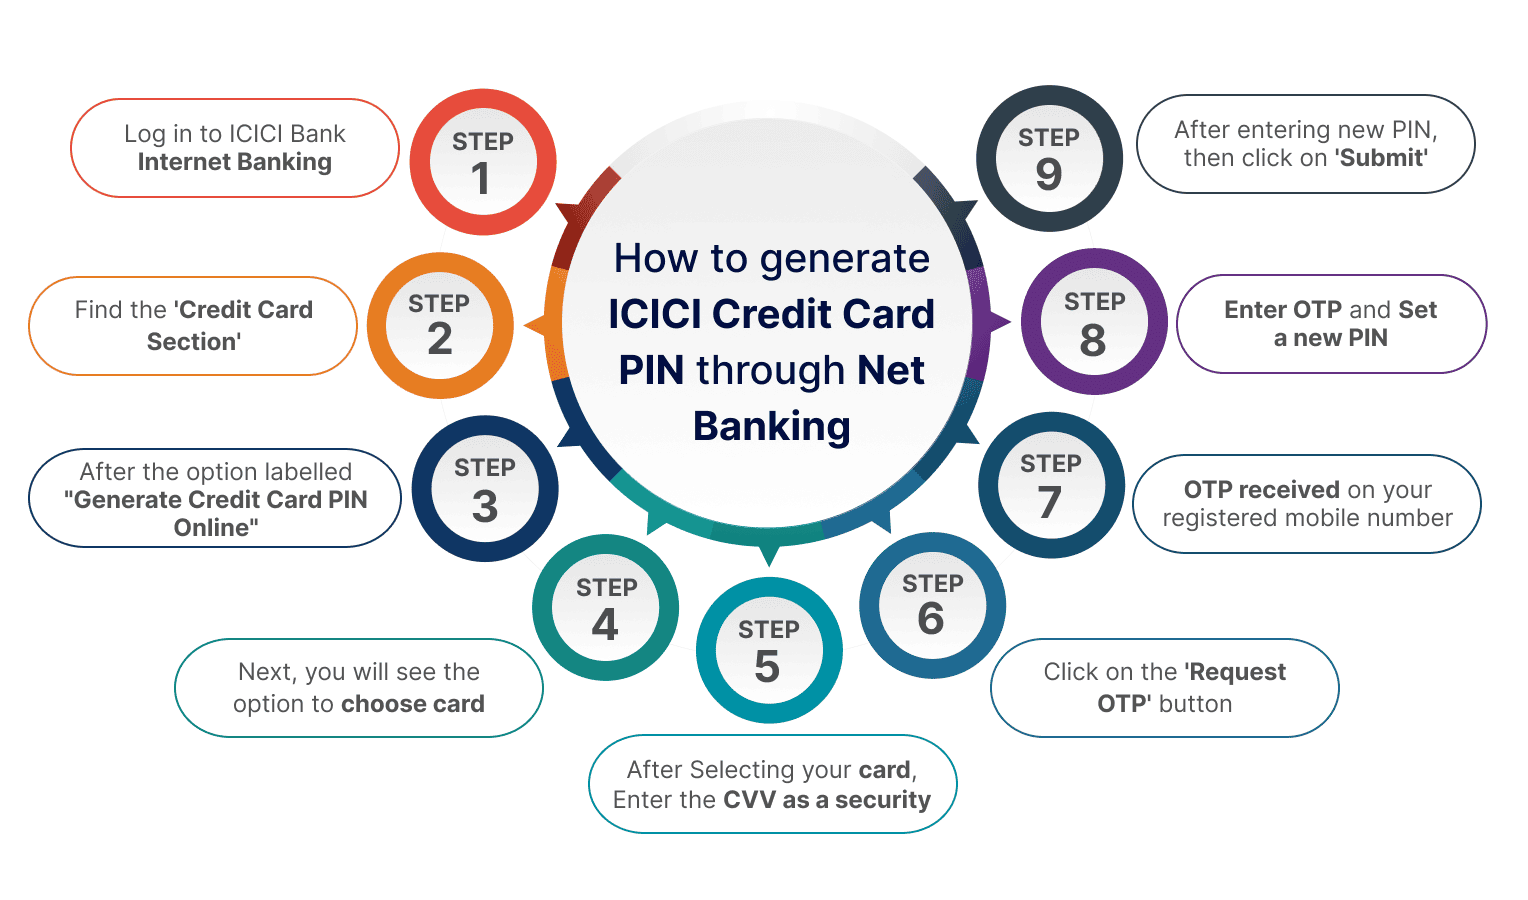 How to generate ICICI Credit Card PIN through Net Banking